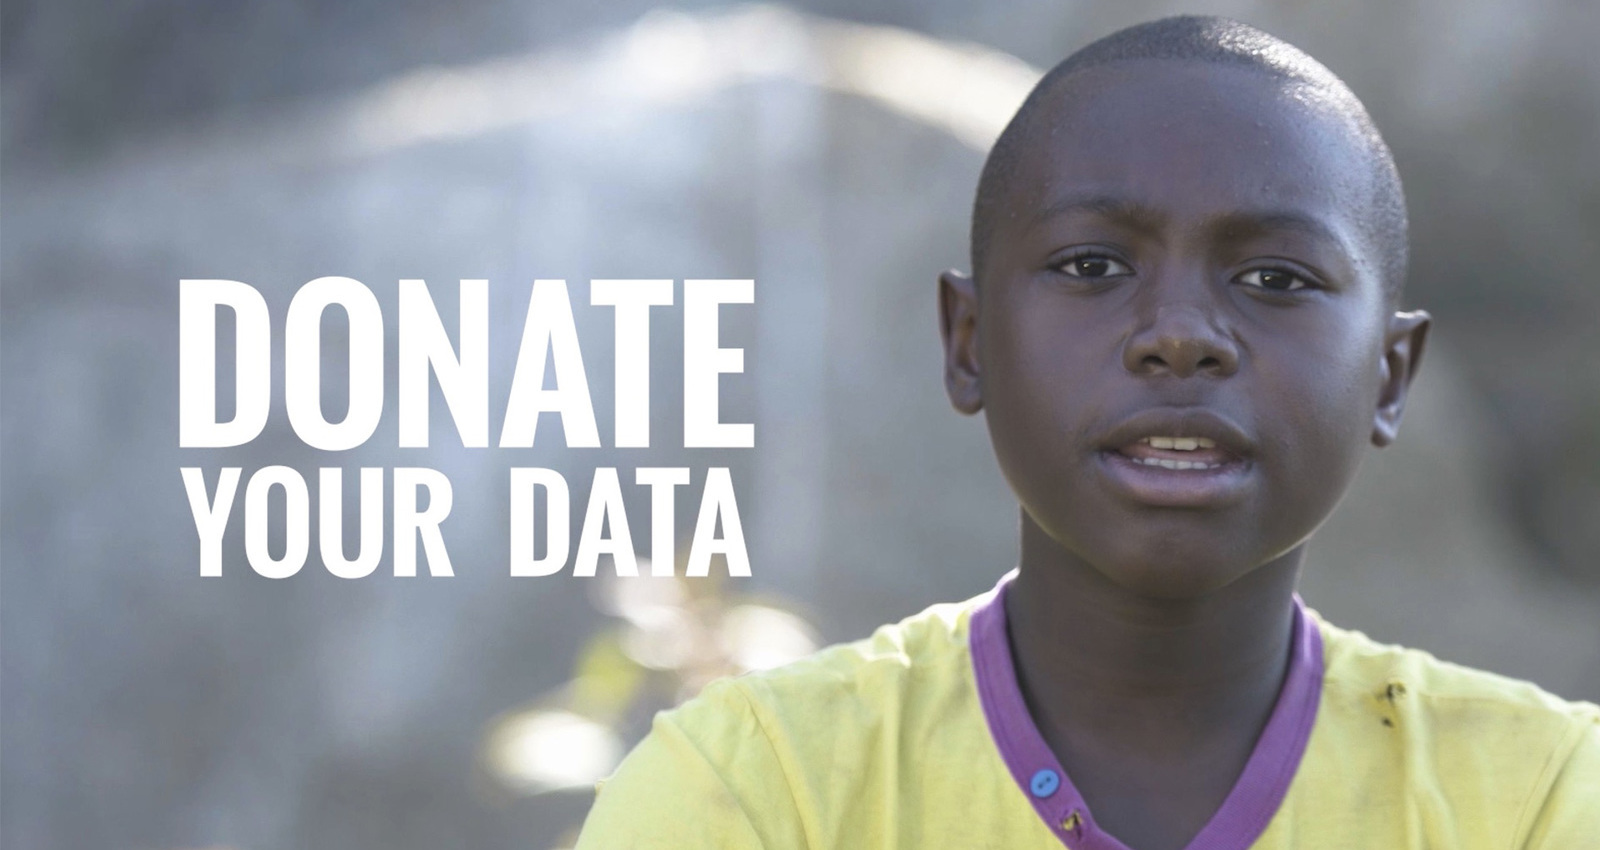 Donate your data